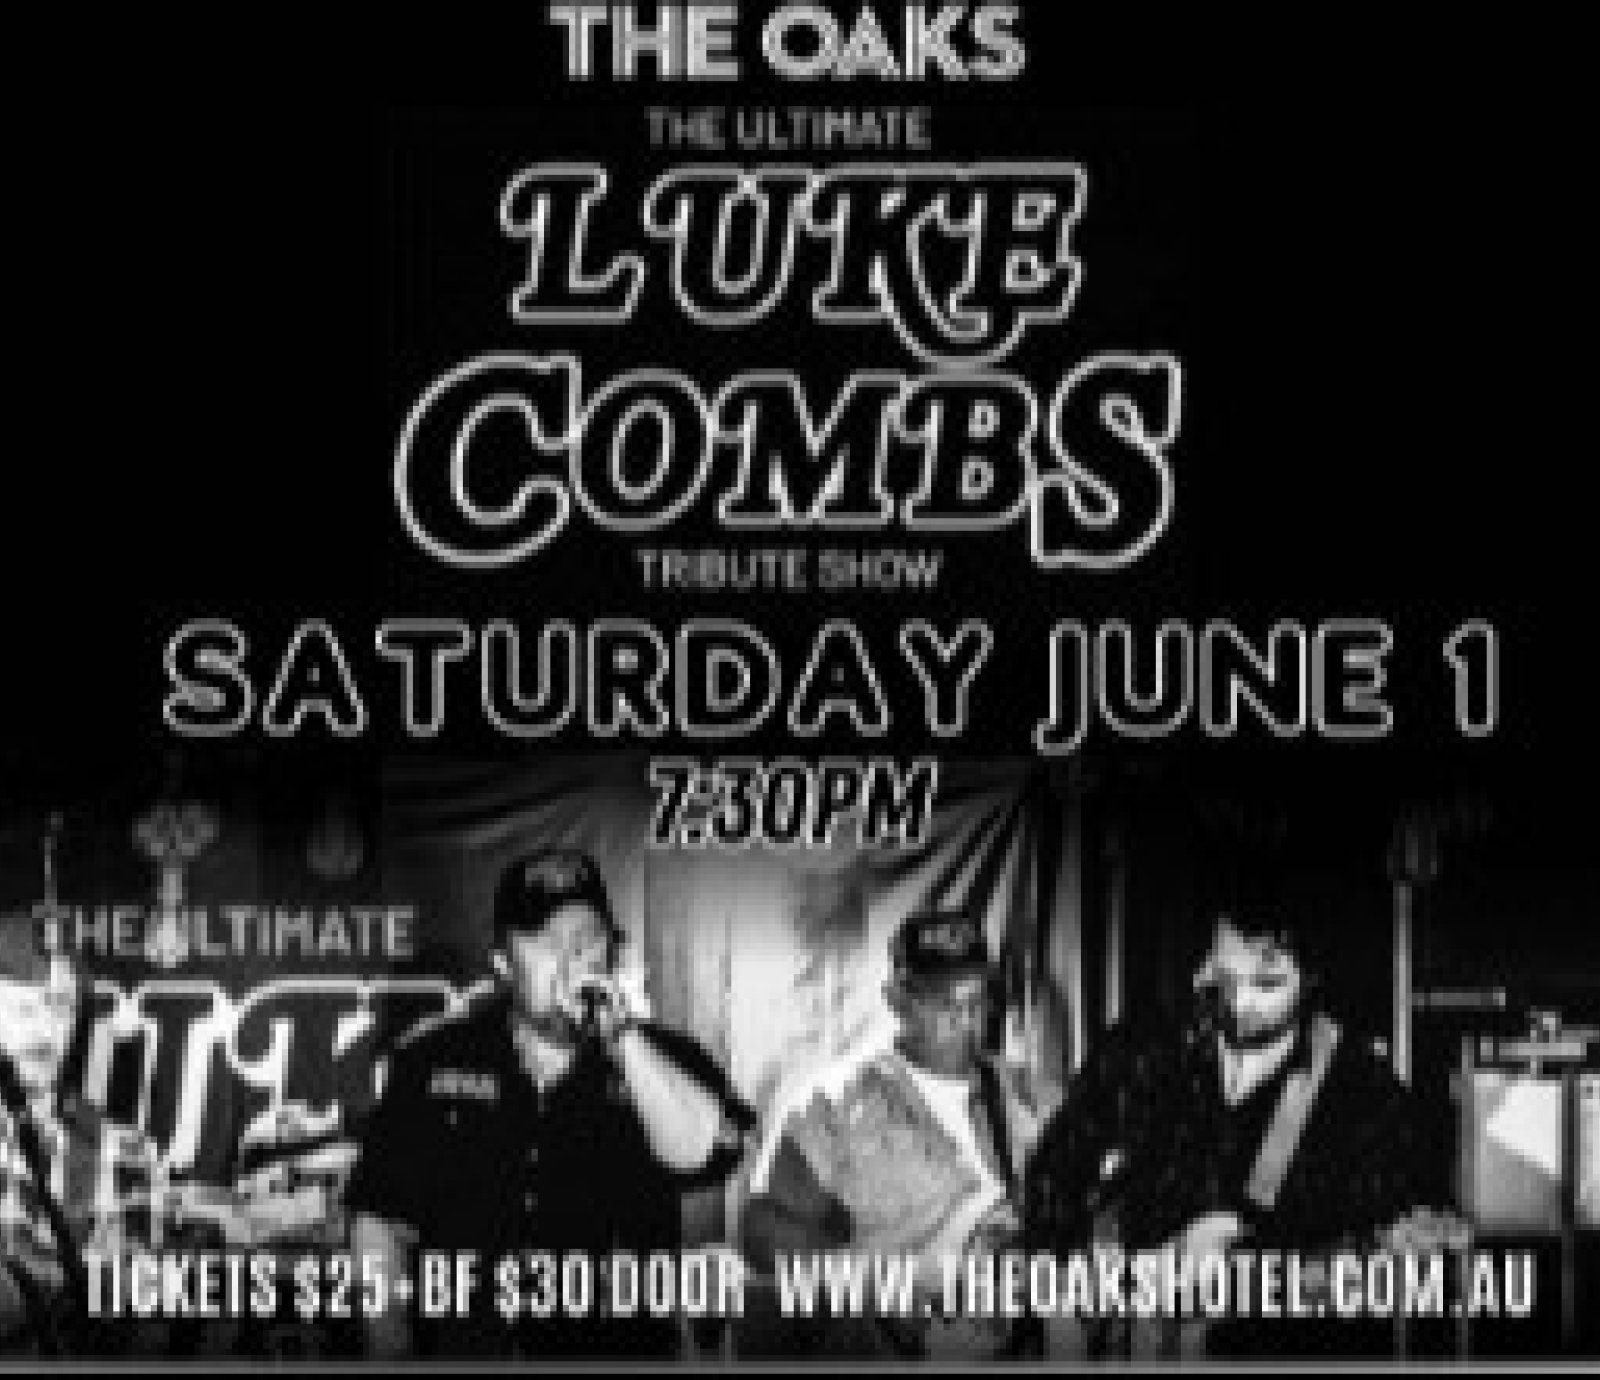 The Ultimate Luke Combs Tribute Show